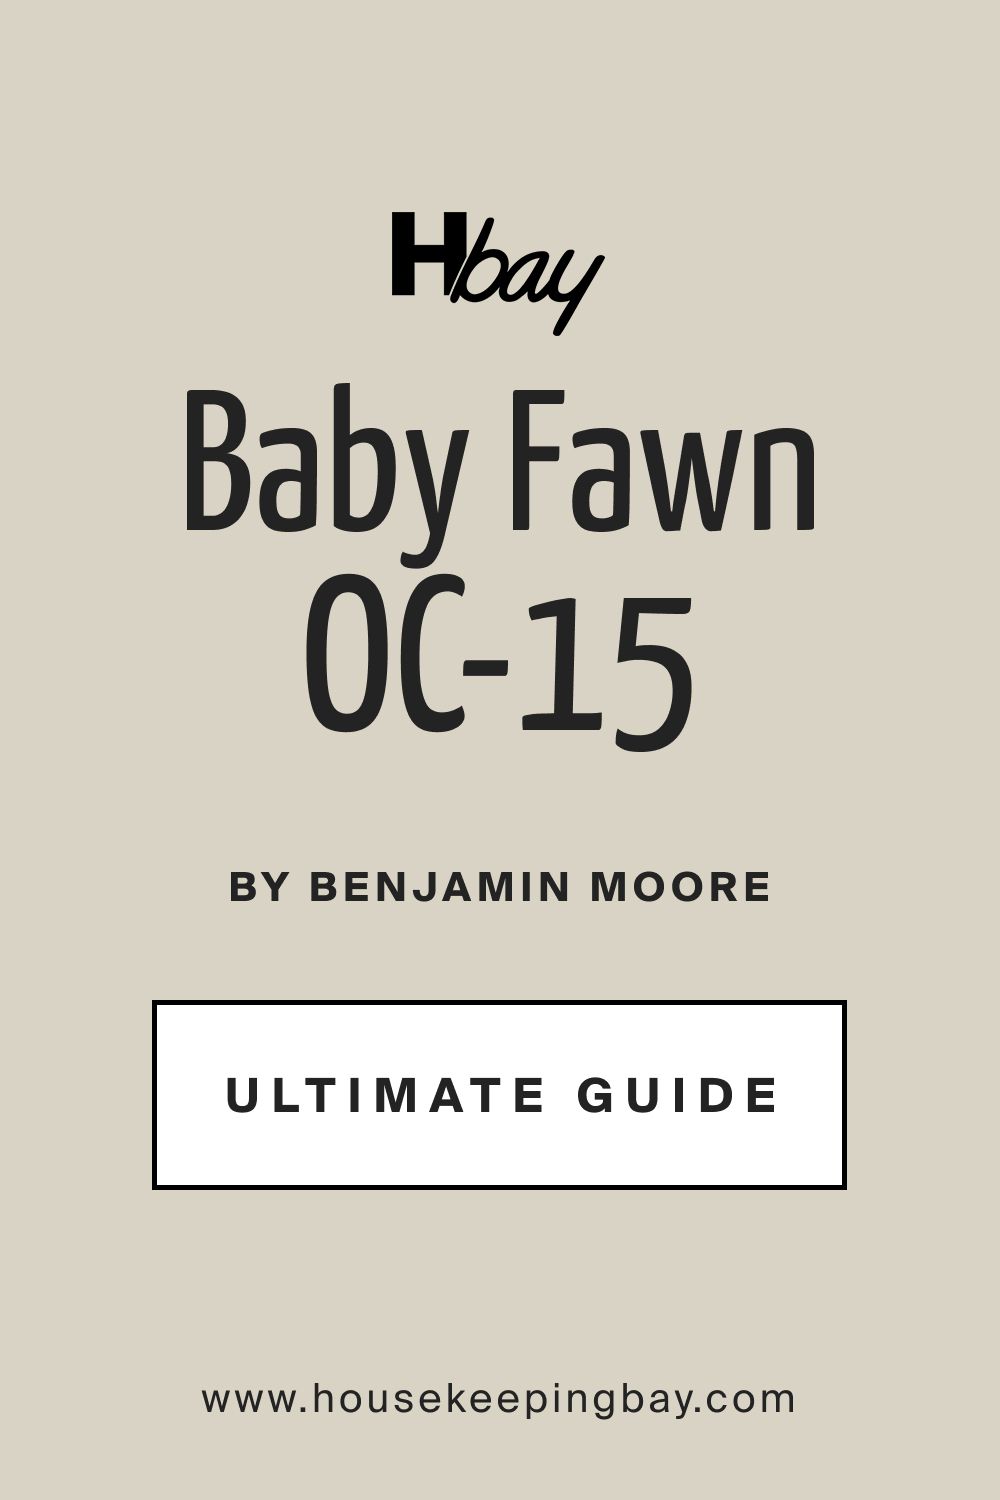 Baby Fawn OC 15 by Benjamin Moore Ultimate Guide